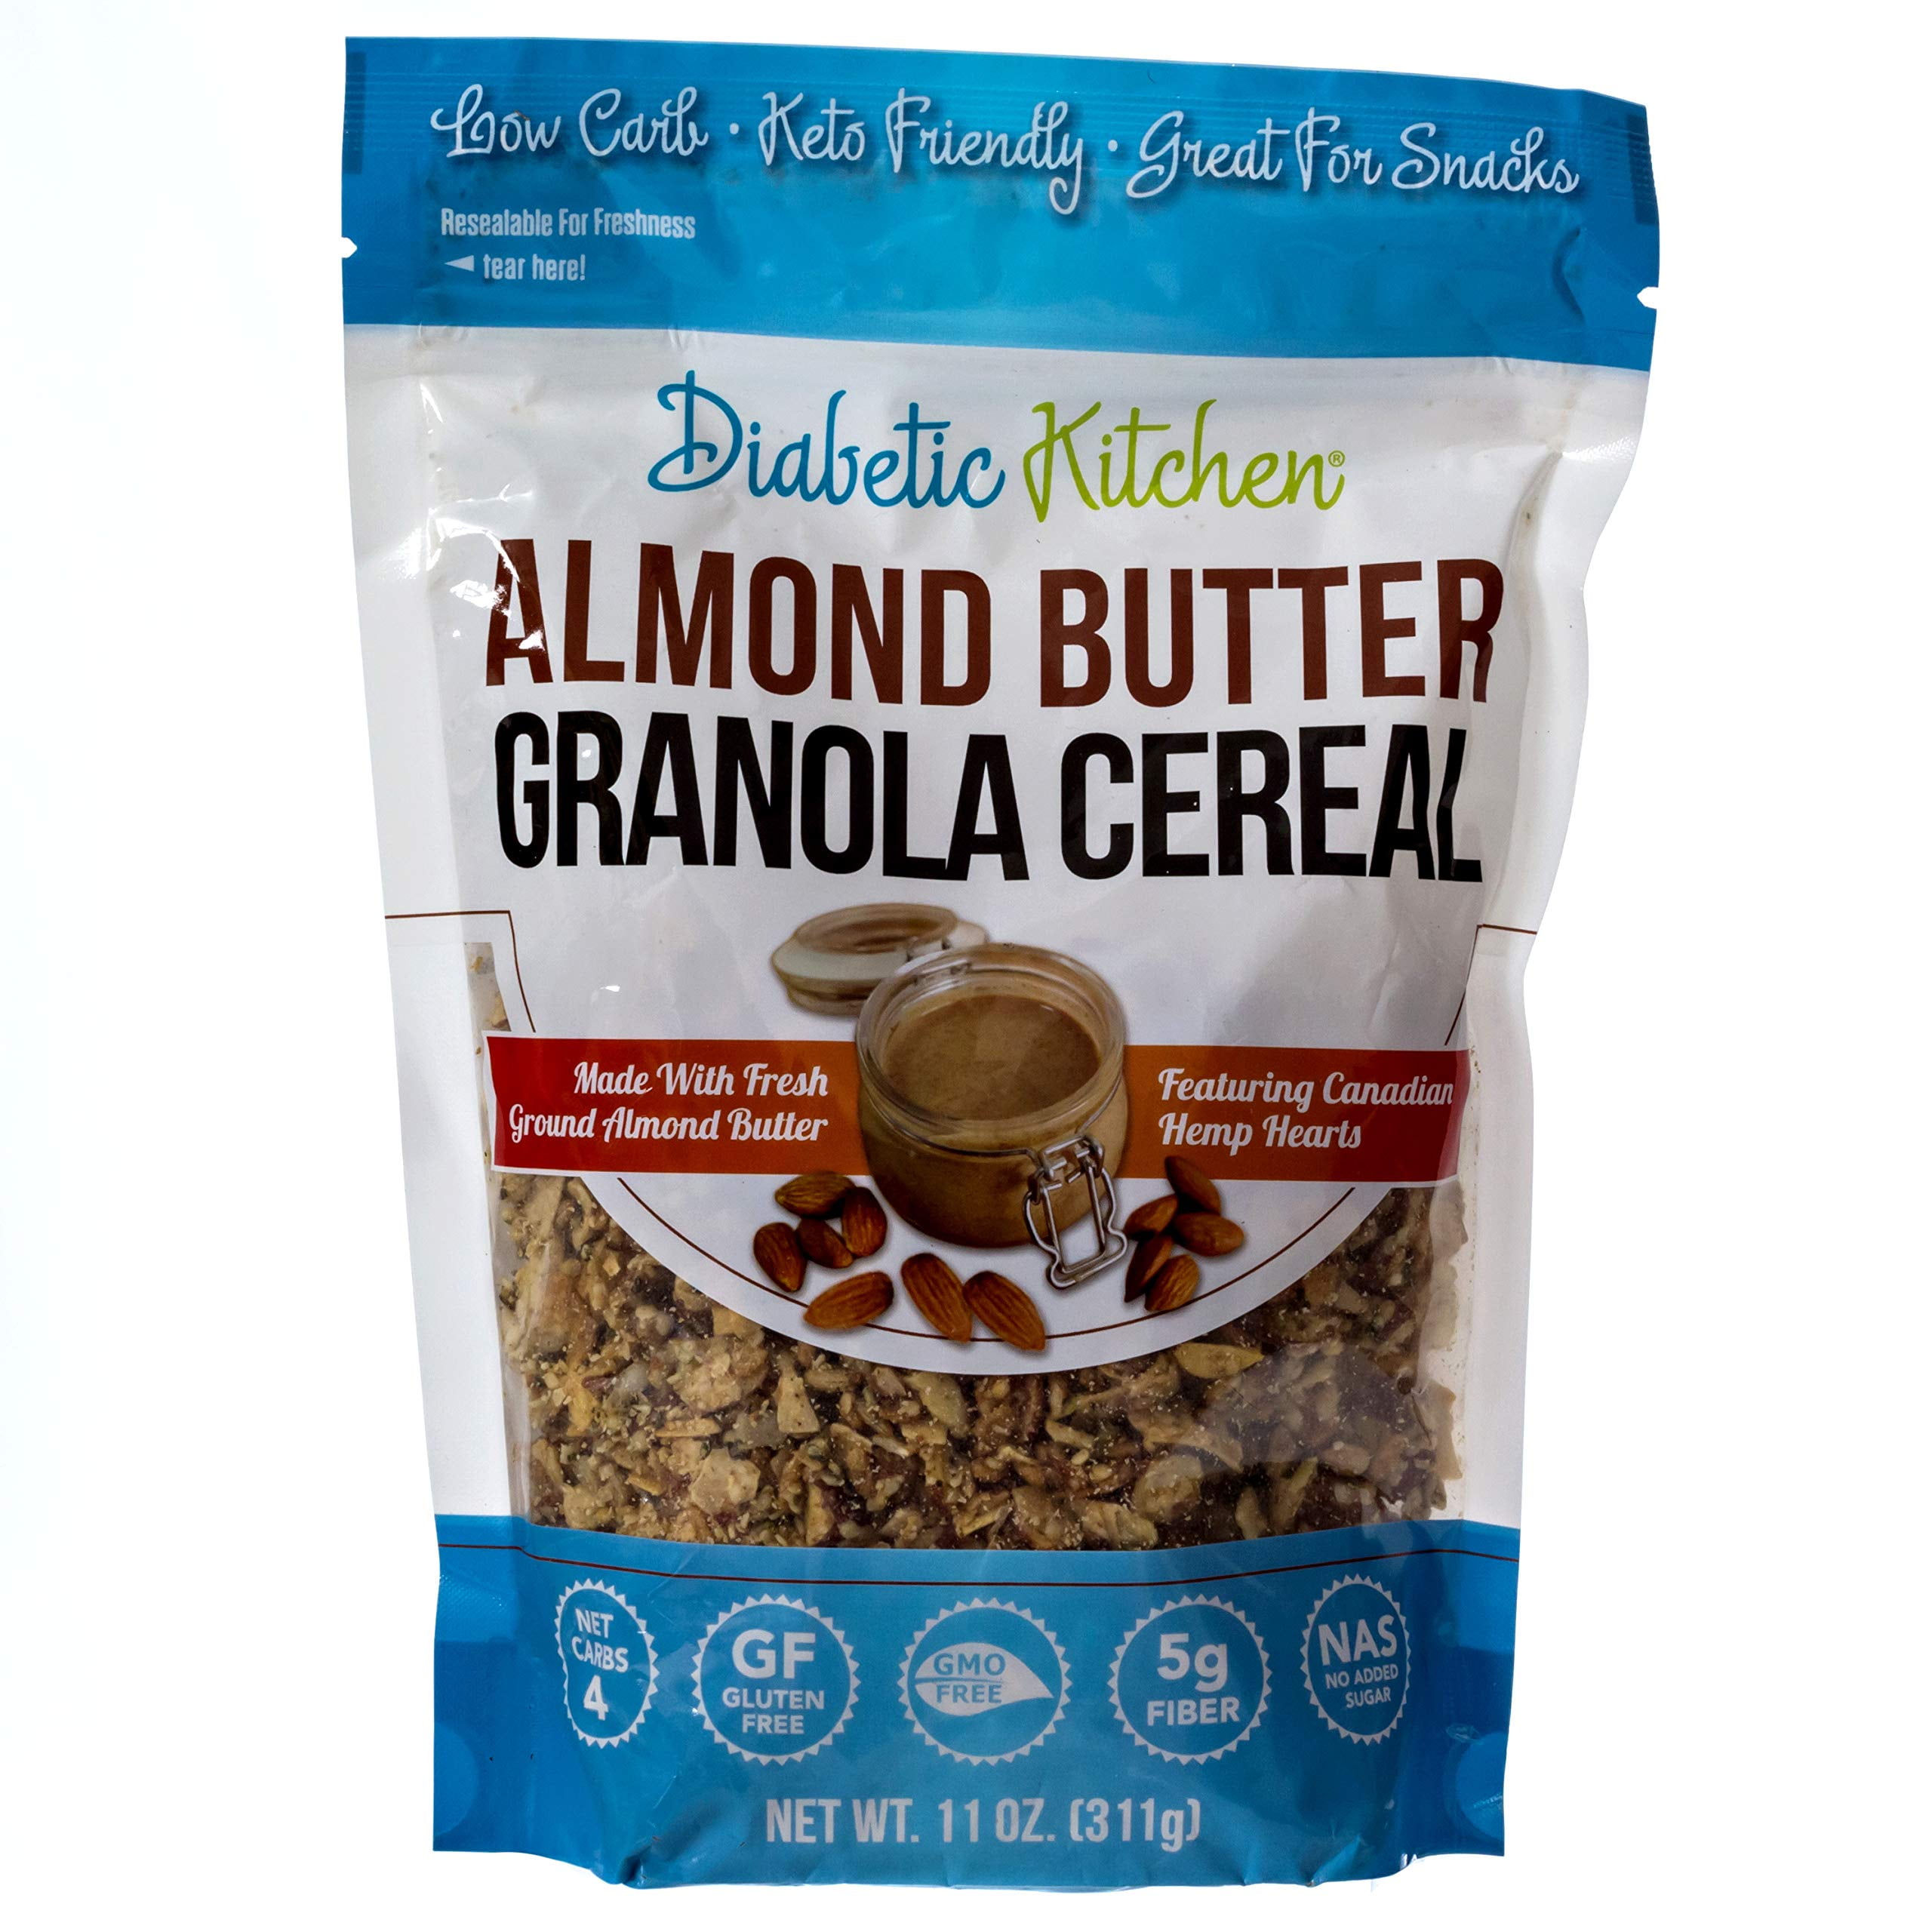 Diabetic Kitchen Almond Butter Granola Cereal Keto, Low Carb, No Sugar Added, Gluten-Free ...